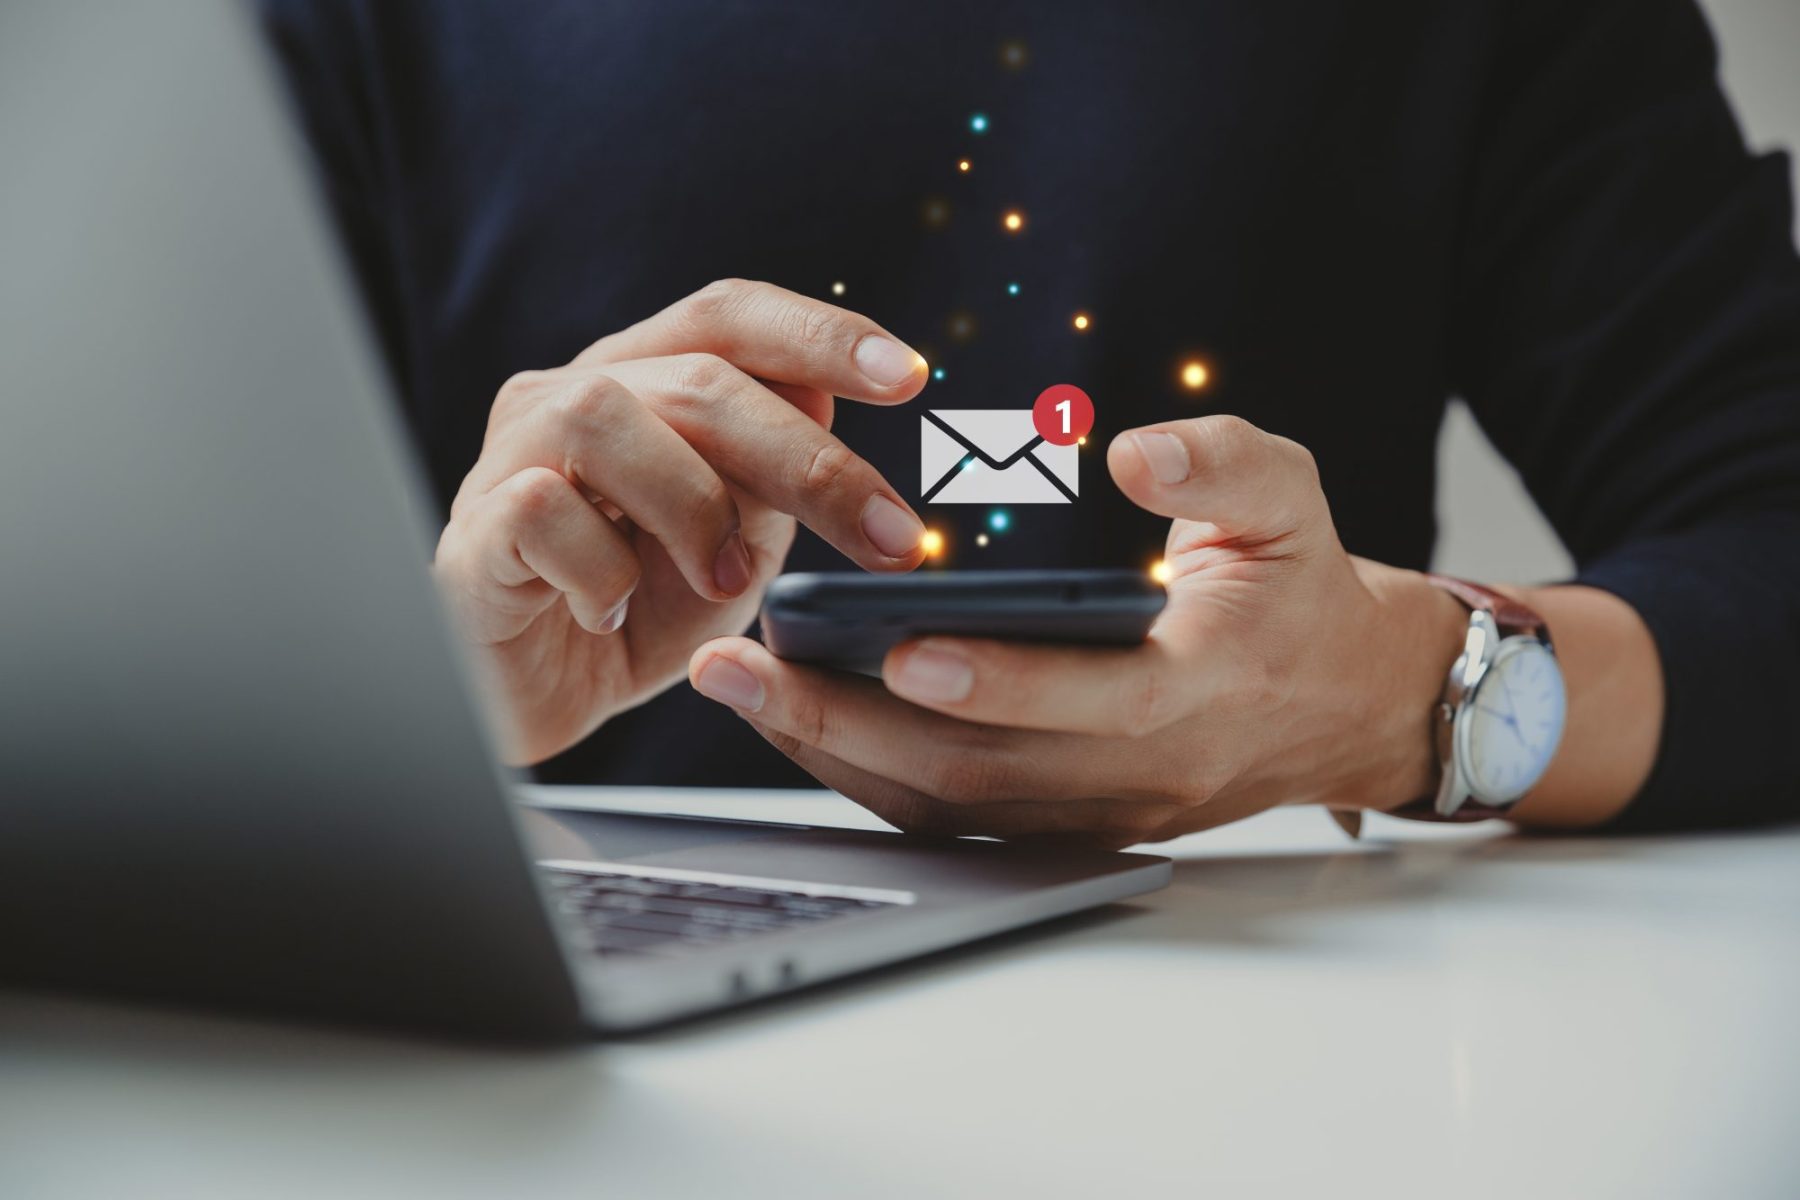 The Benefits of Email Marketing for Small Businesses